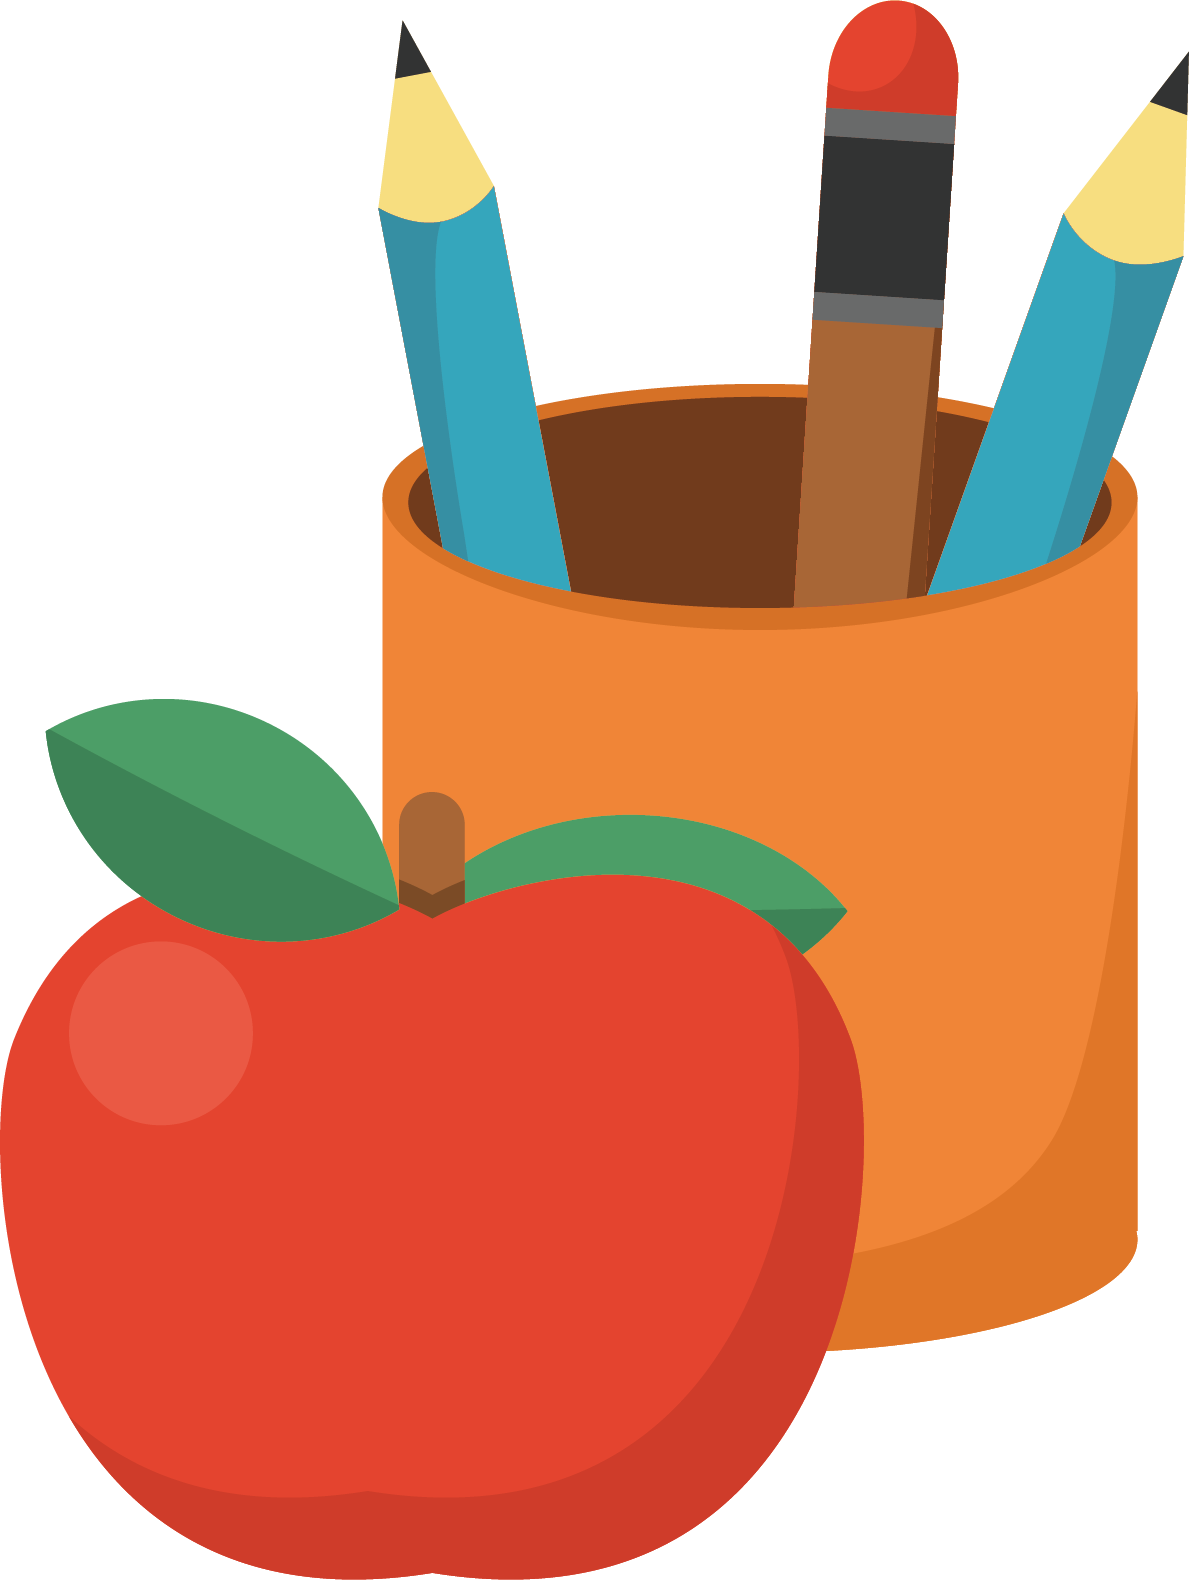 Colorful Pencilsand Apple Clipart PNG